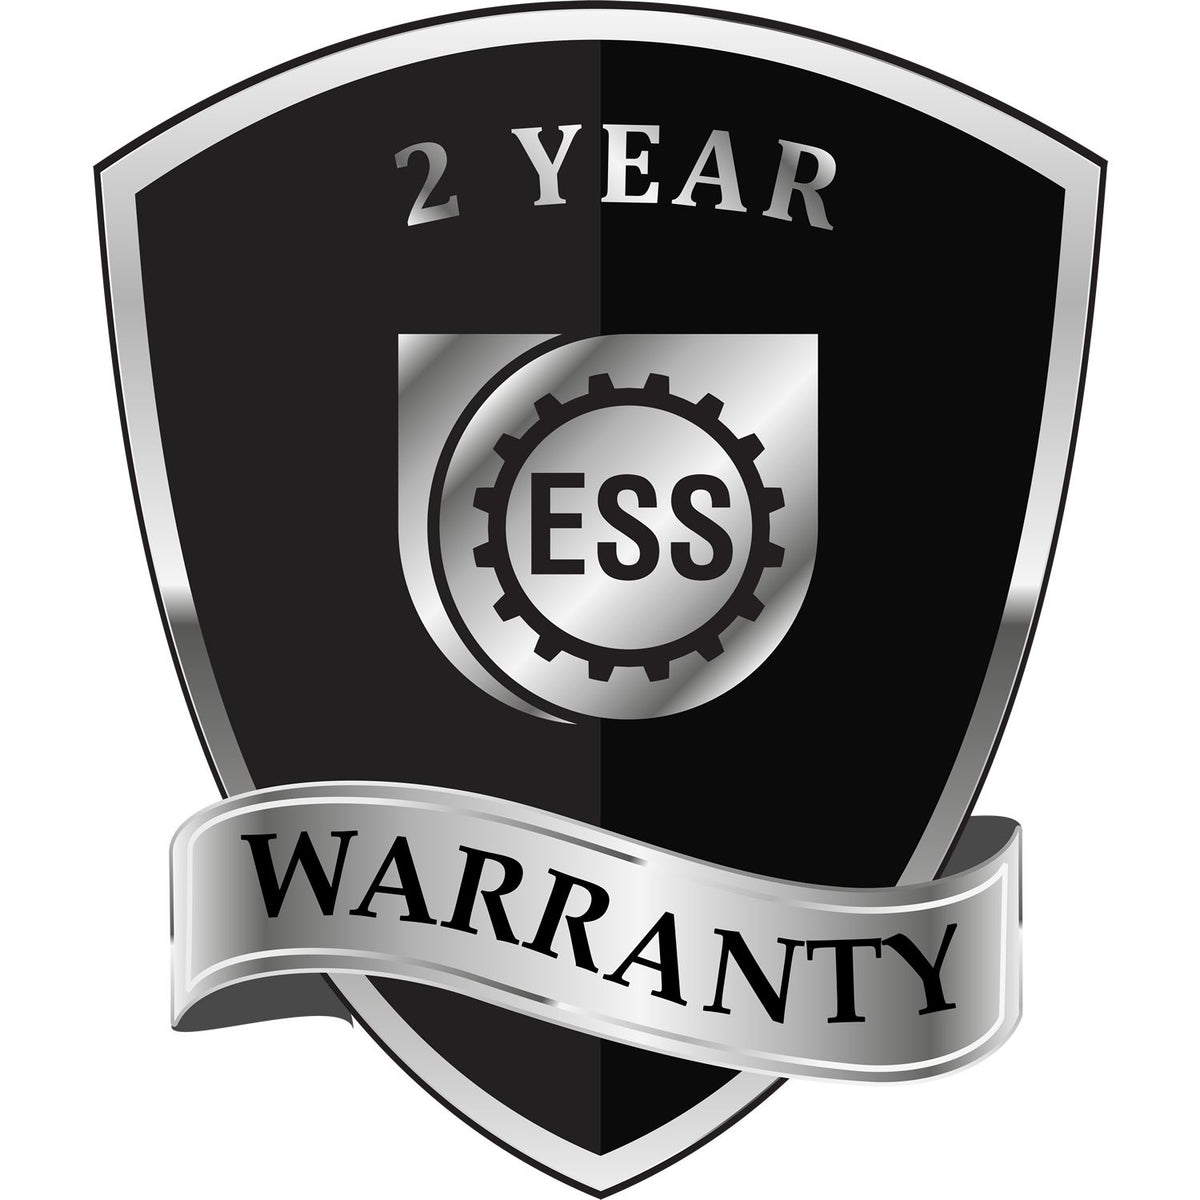 A black and silver badge or emblem showing warranty information for the Ohio Geologist Desk Seal